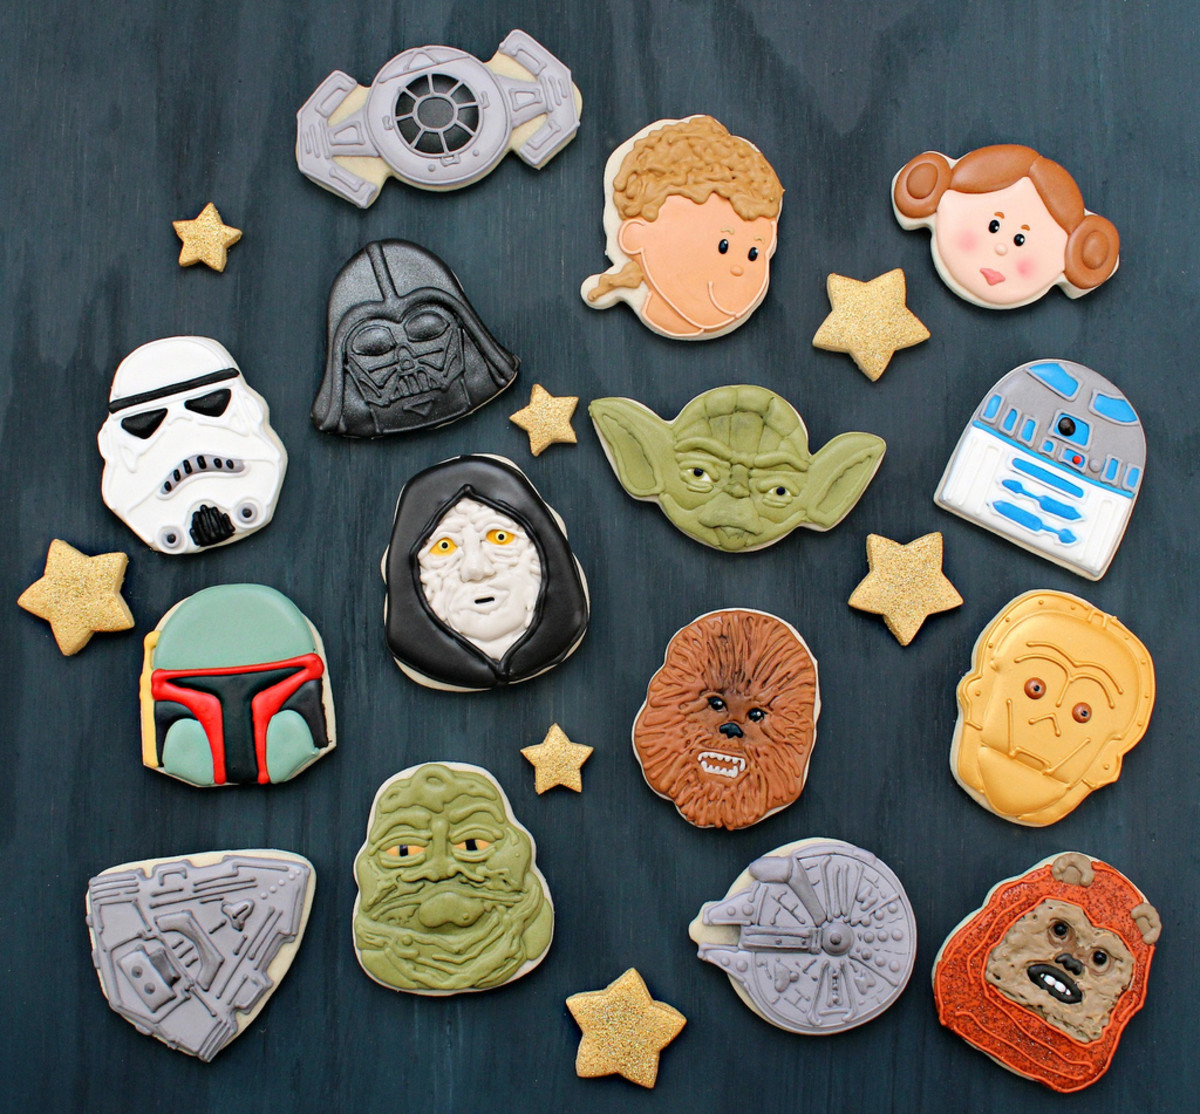 Star Wars Party Ideas and Free Downloads